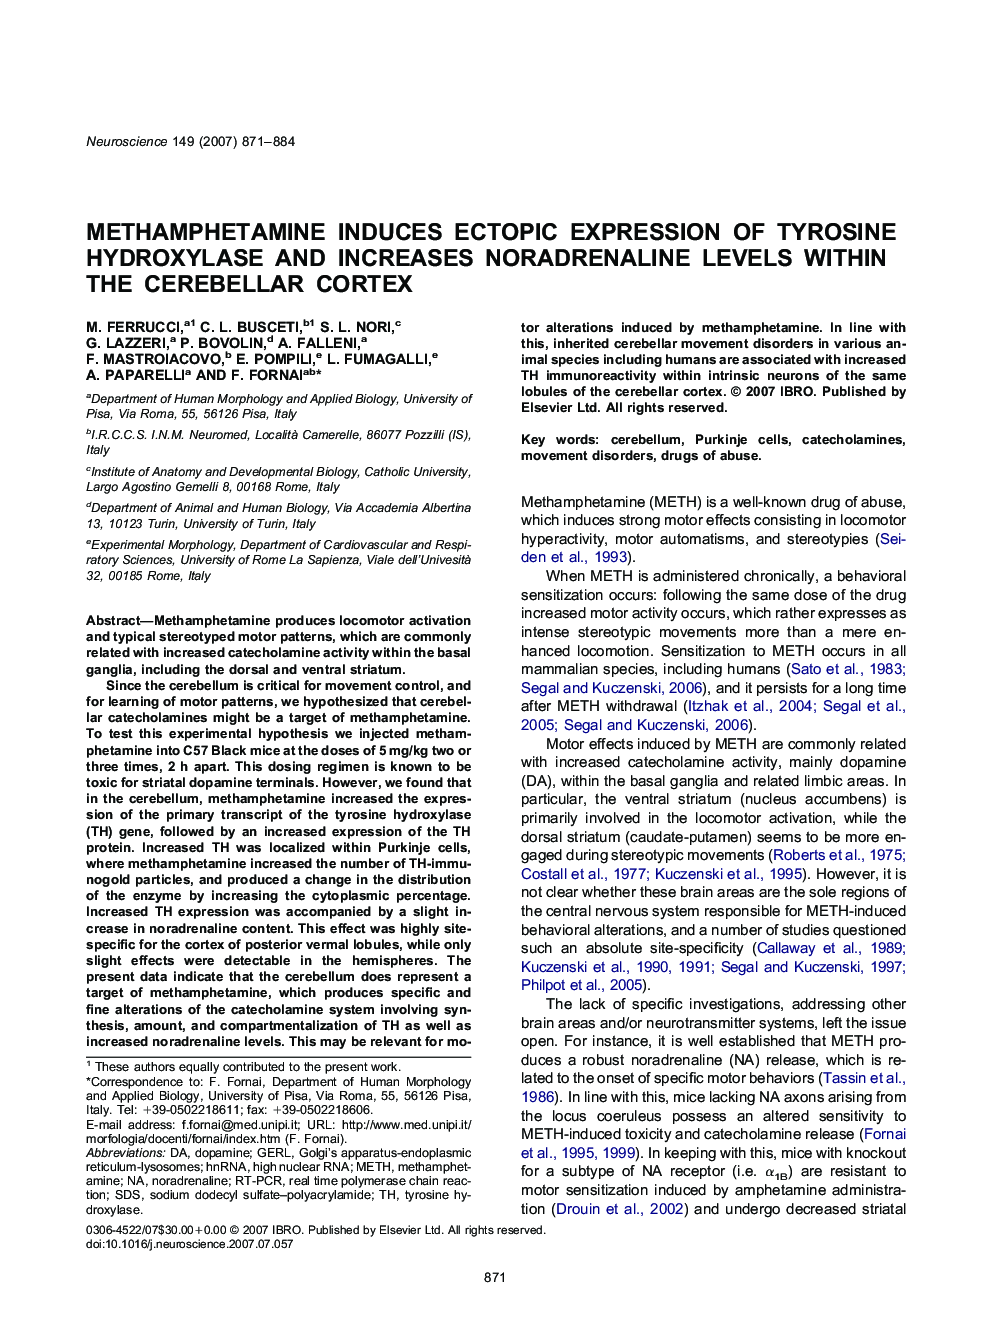 Methamphetamine induces ectopic expression of tyrosine hydroxylase and increases noradrenaline levels within the cerebellar cortex